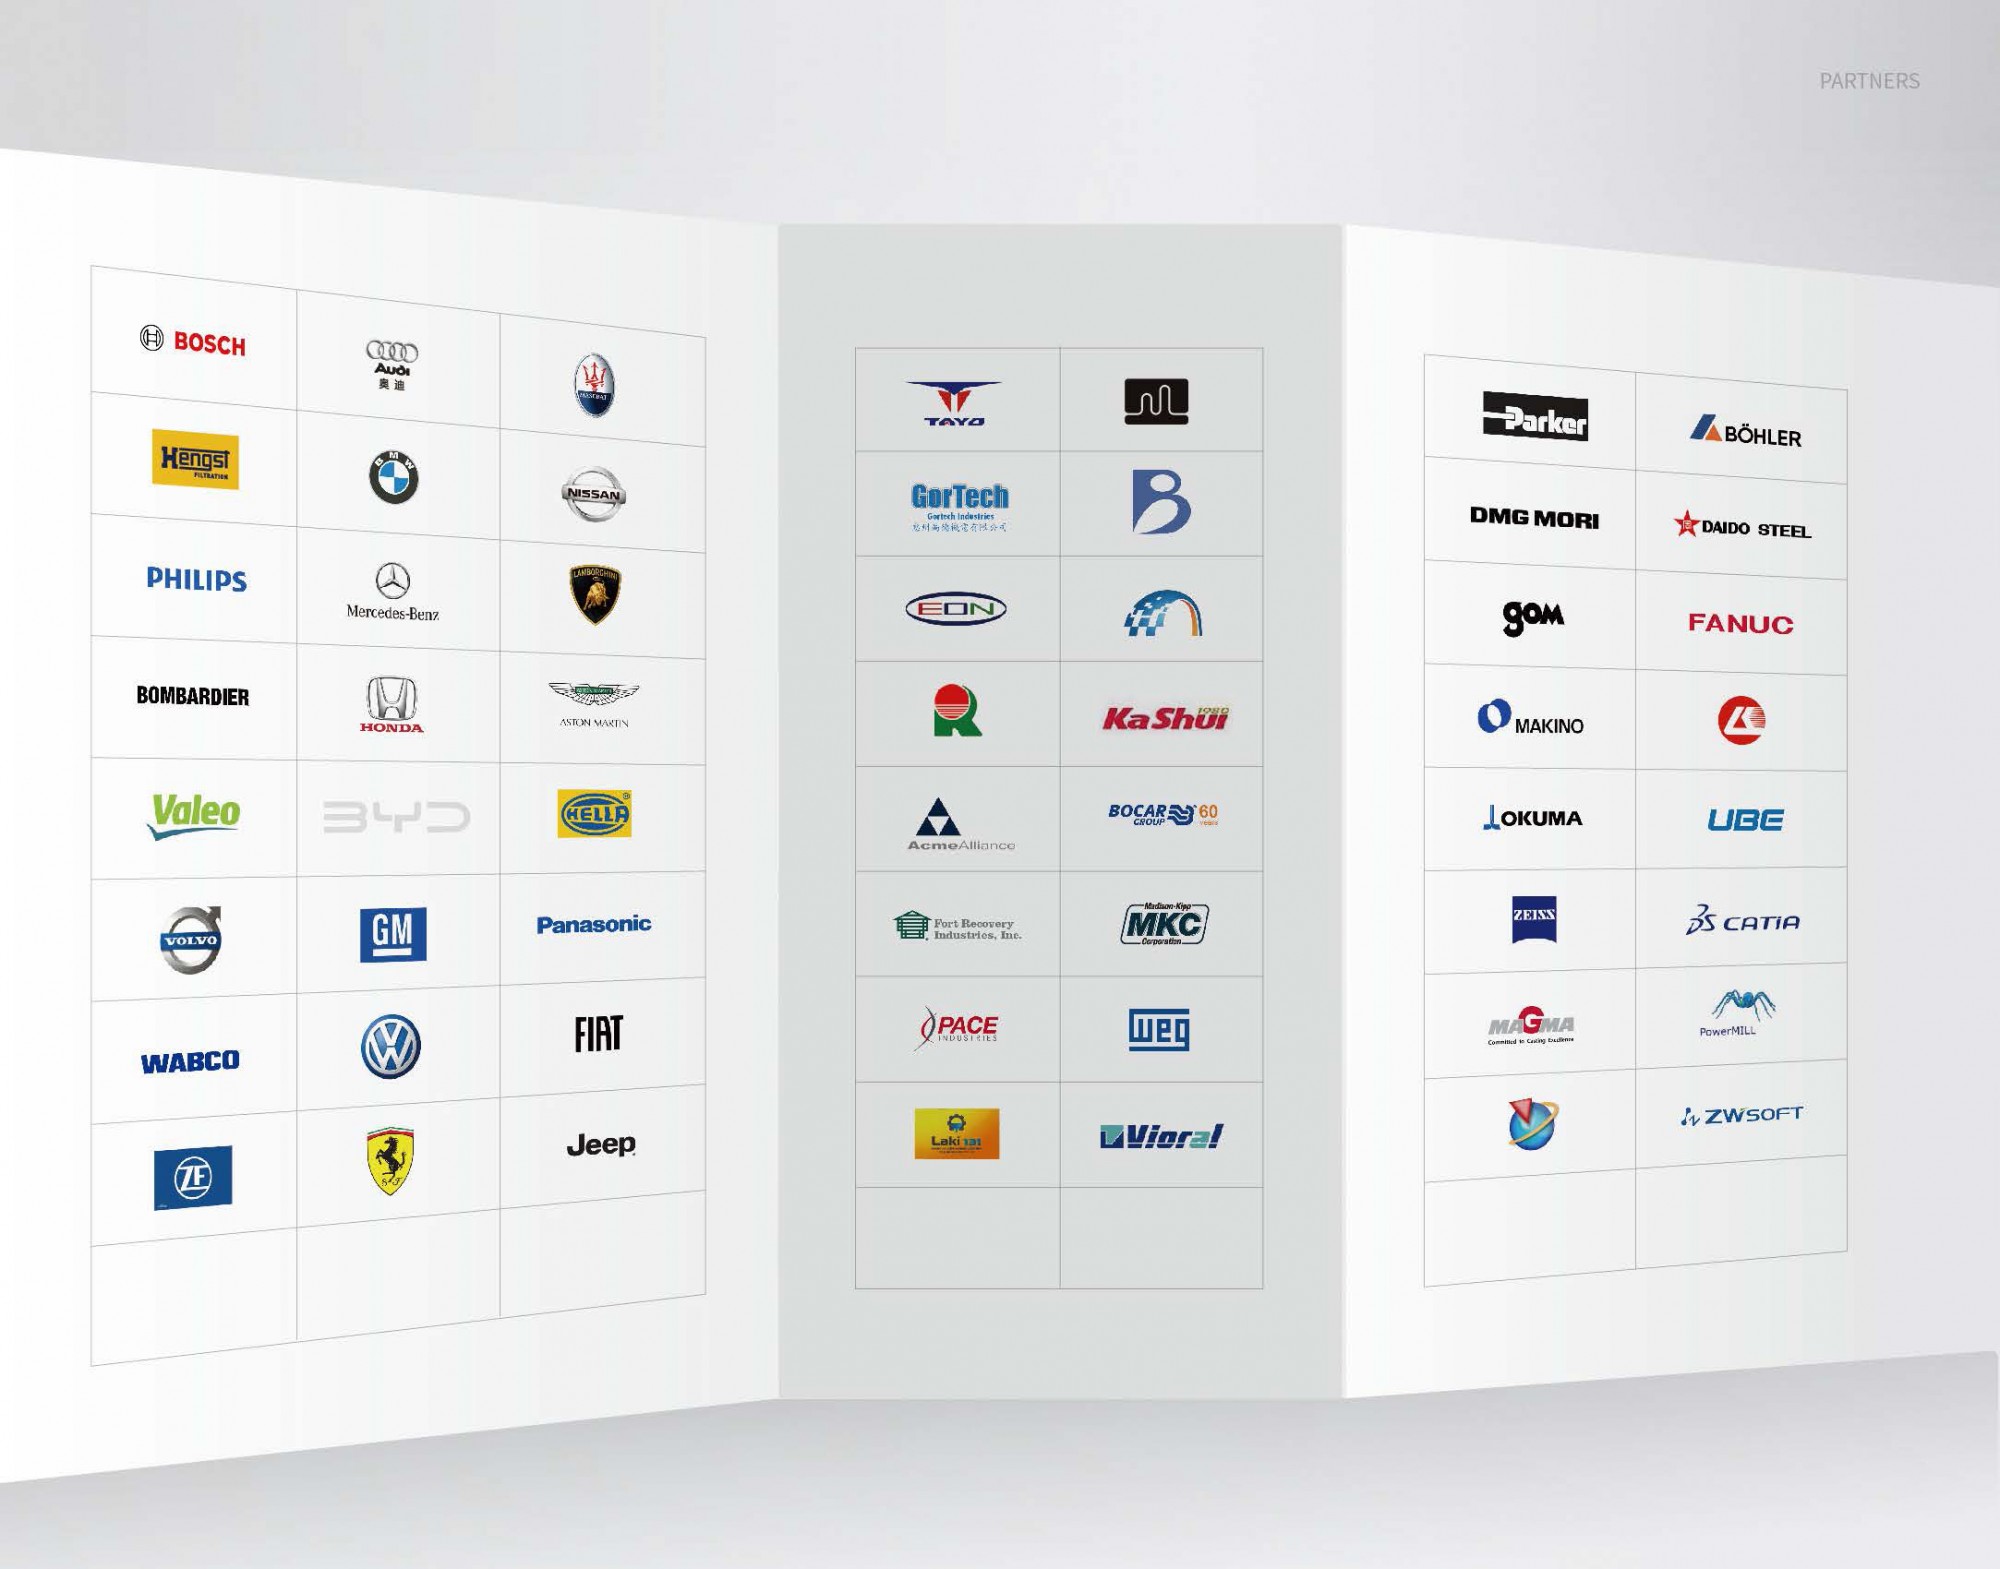 Our end users include industry leading brands such as Ferrari, Lamborghini, Mercedes-Benz, BMW, Philips, Bosch, Panasonic,